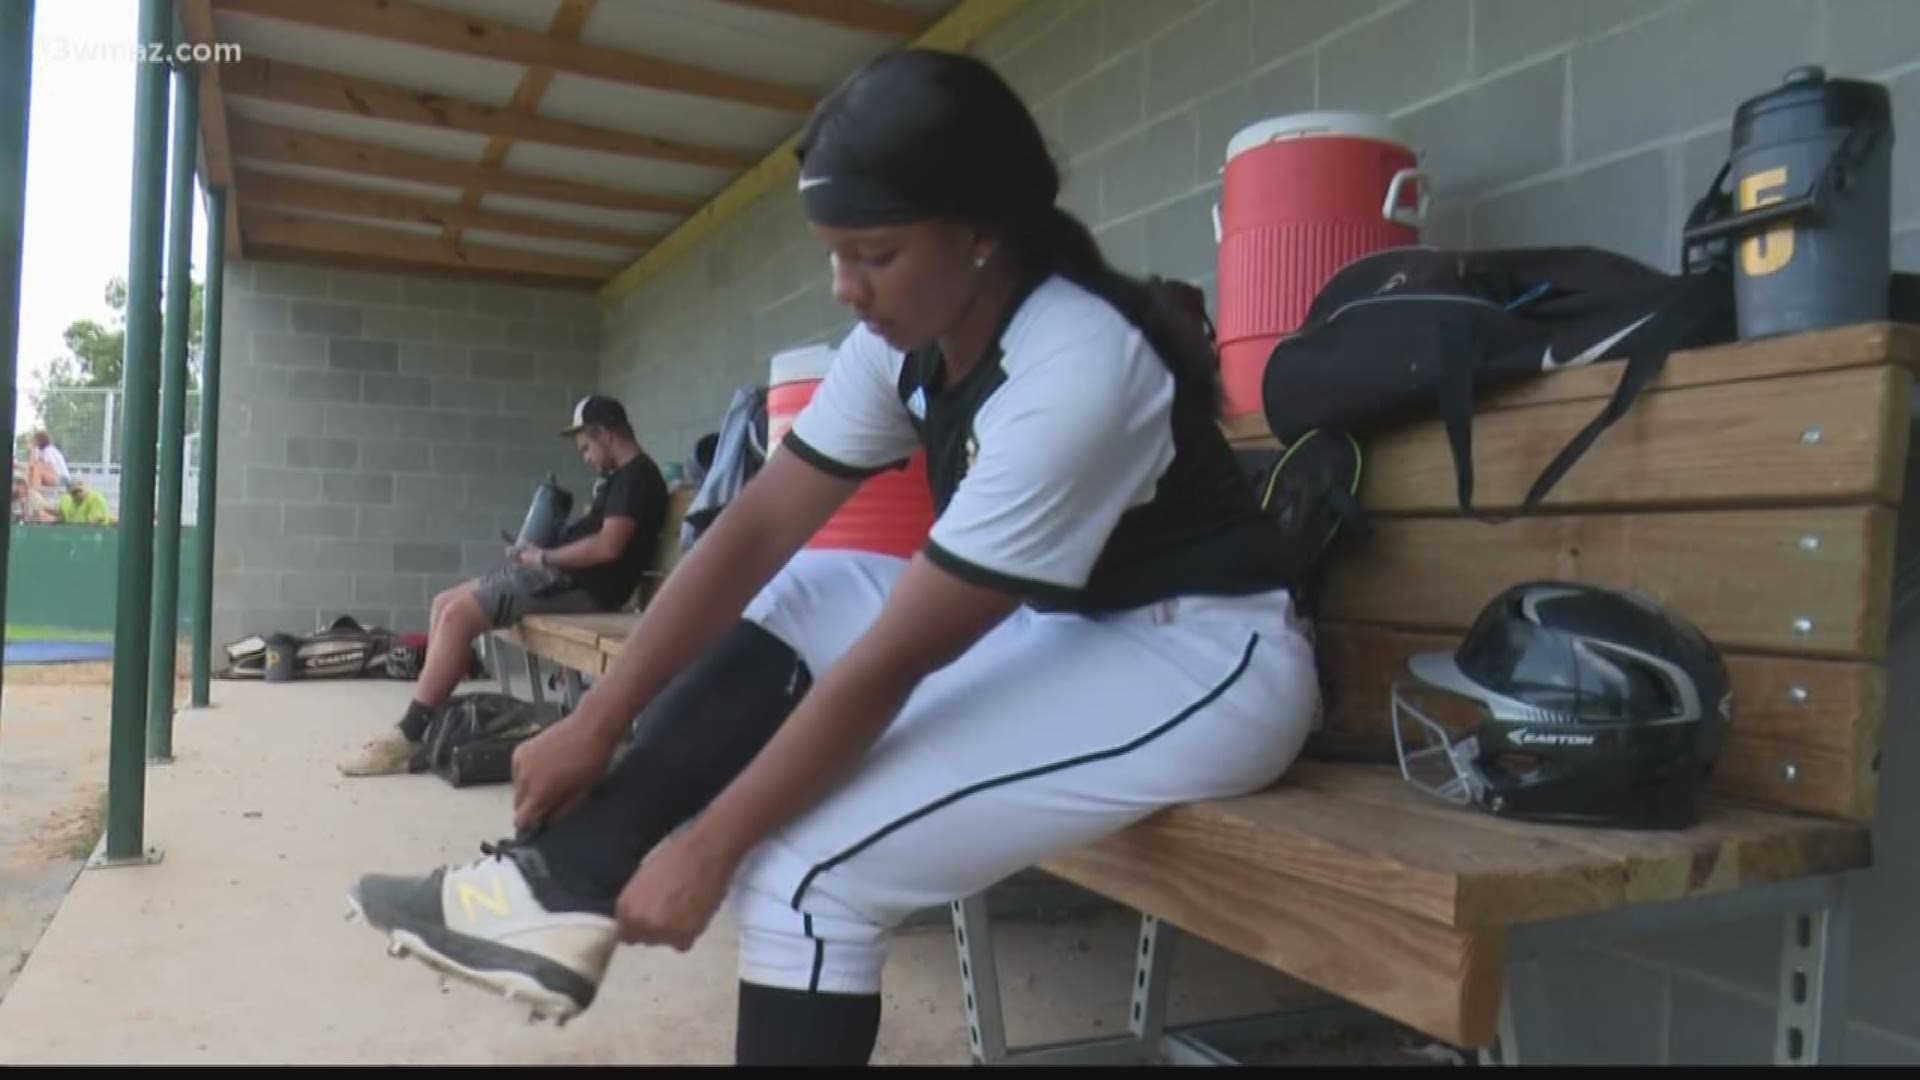 It's time to shine the spotlight on a deserving student athlete getting it done on the diamond and in the classroom. Meet Alex Scott of Peach County softball.